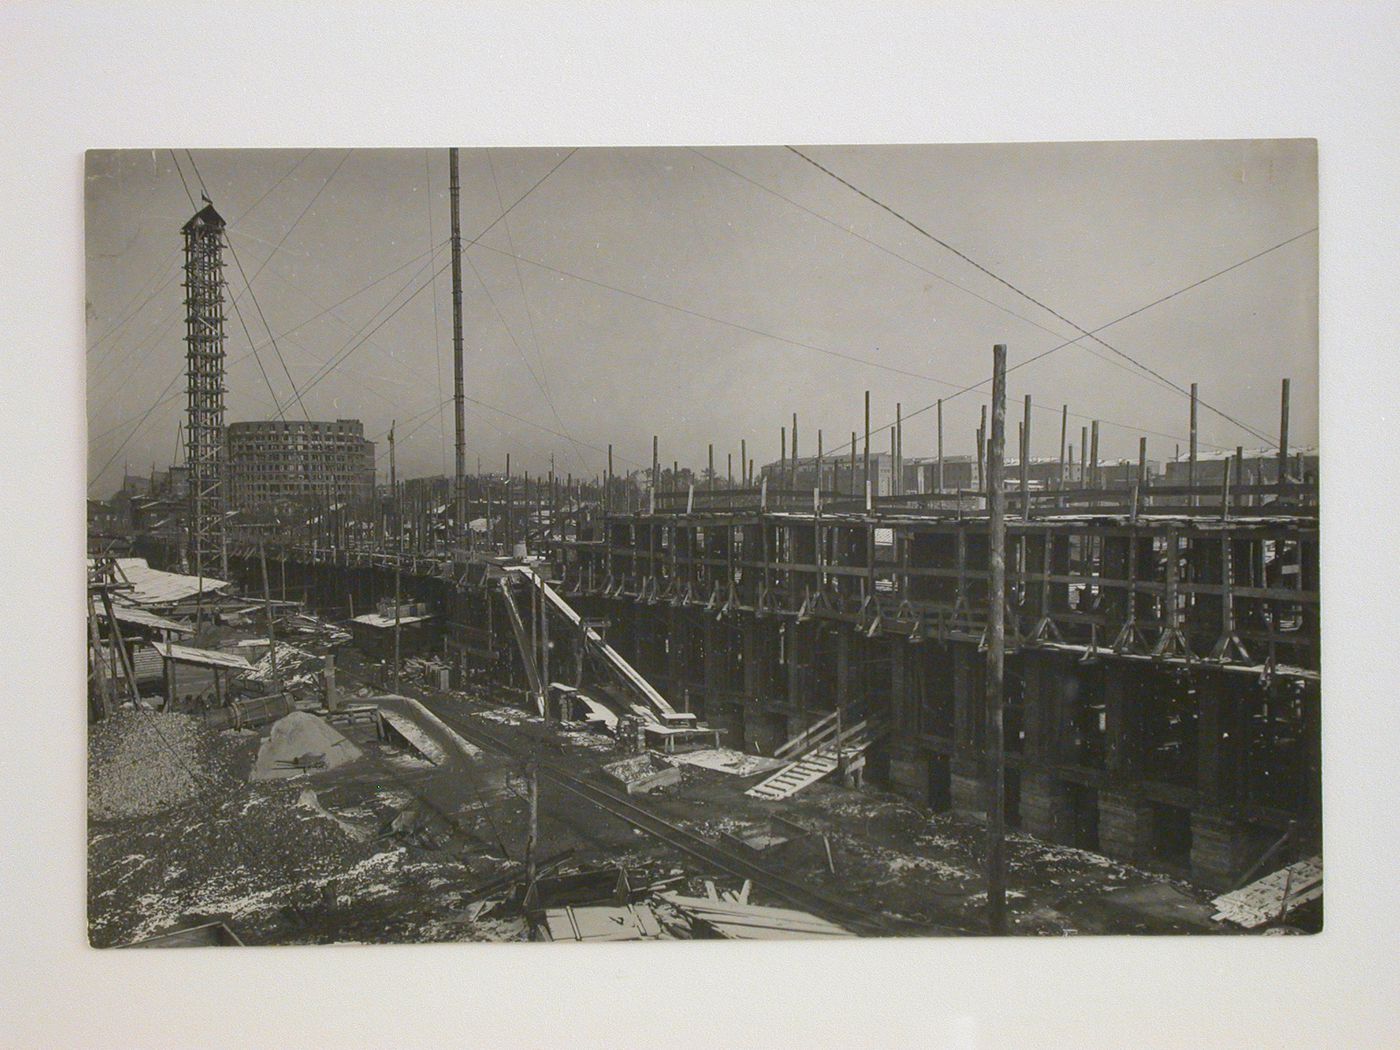 View of the Building of Industry construction site, Sverdlovsk, Soviet Union (now Ekaterinburg, Russia)